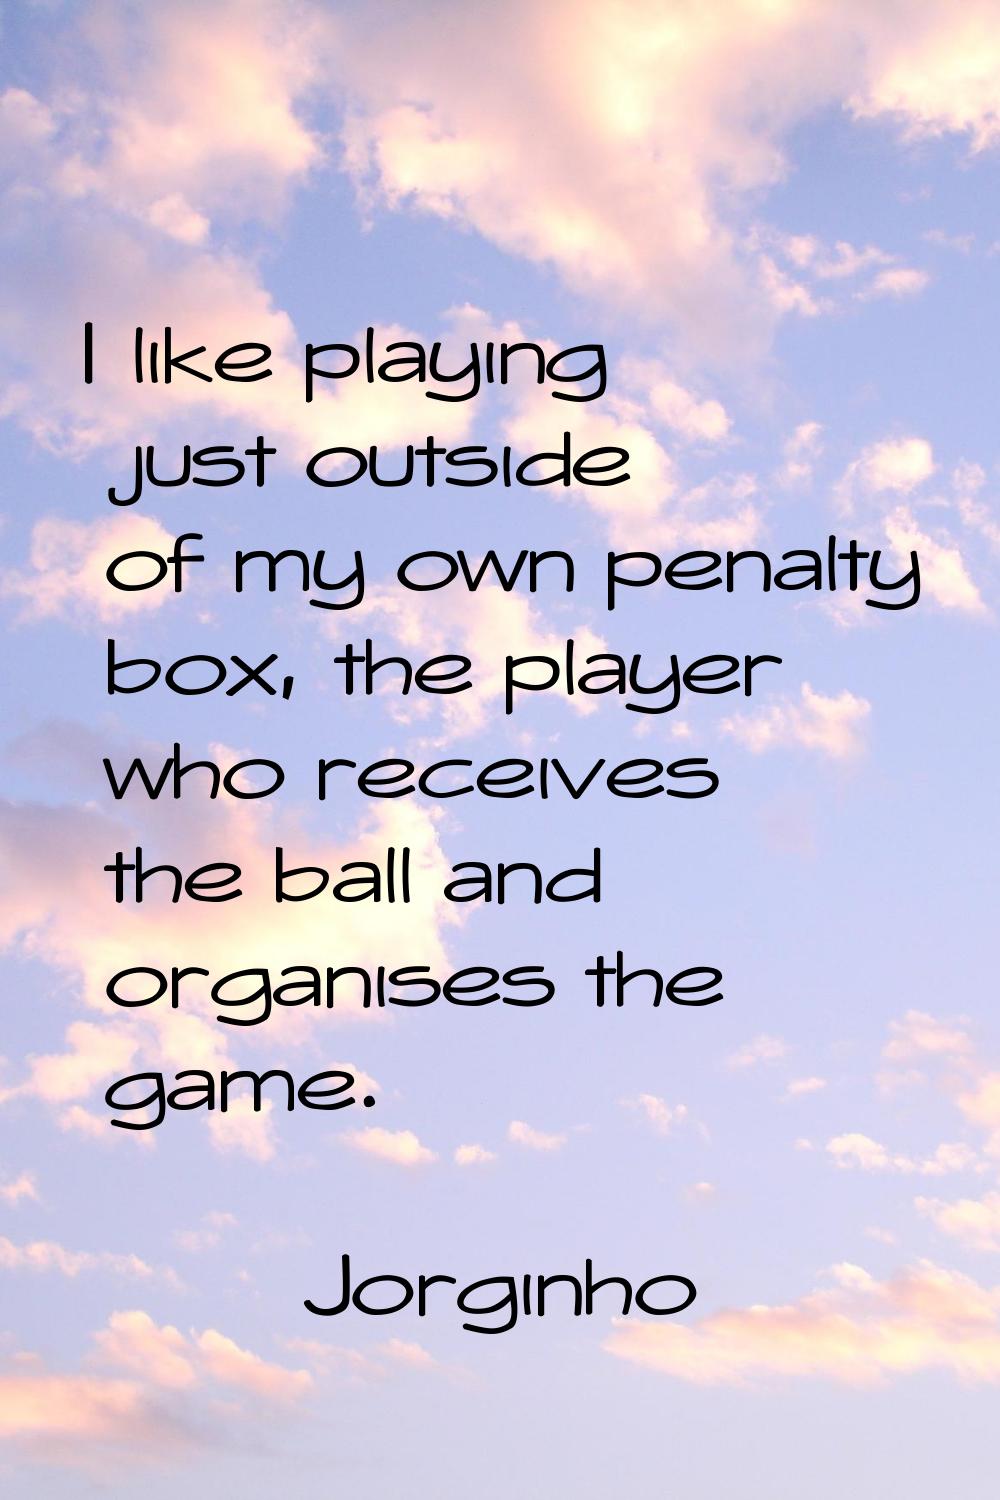 I like playing just outside of my own penalty box, the player who receives the ball and organises t